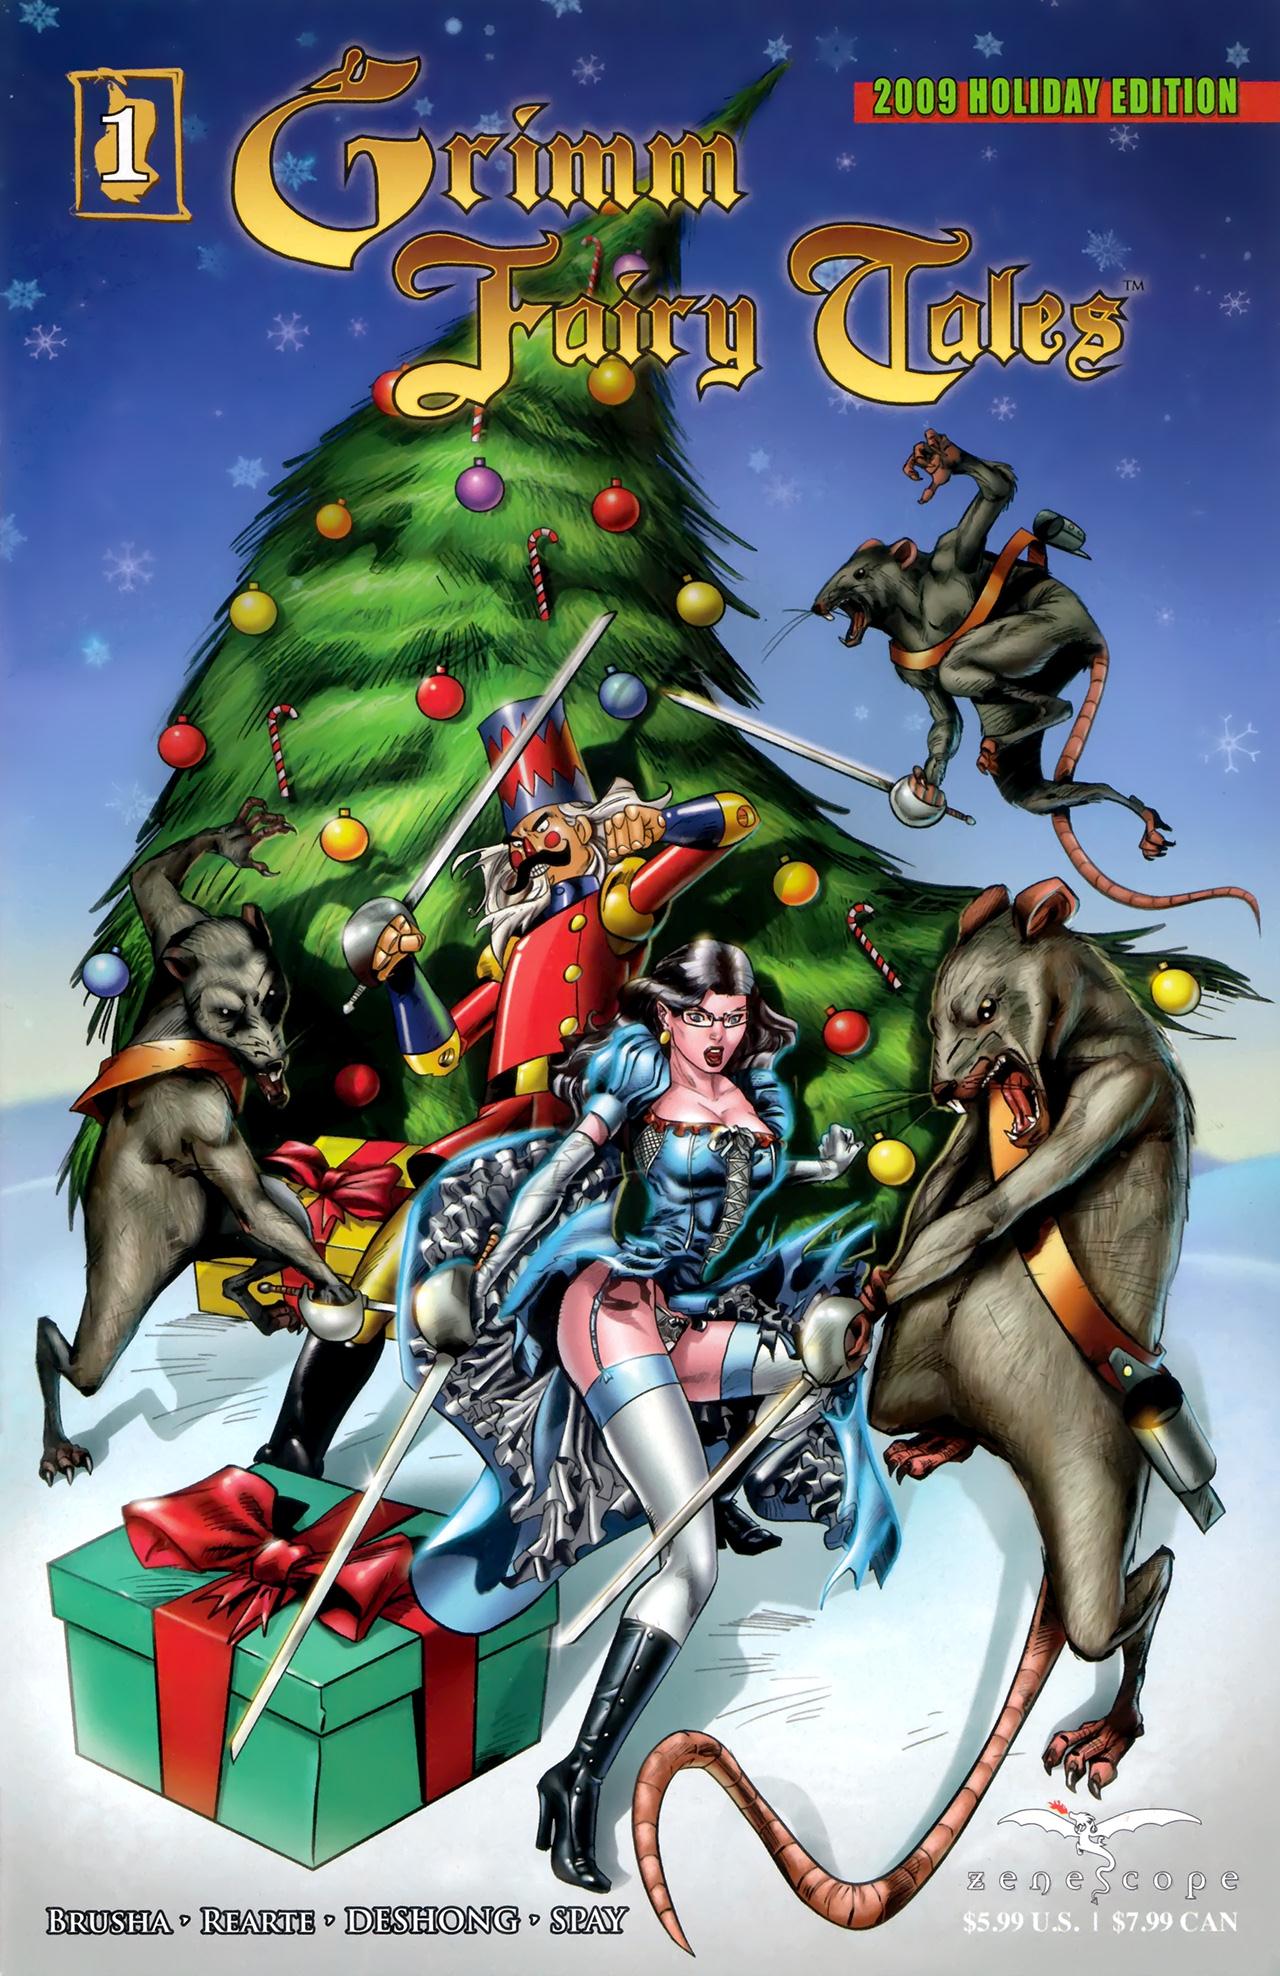 Grimm Fairy Tales Holiday Edition 2009 - The Nutcracker